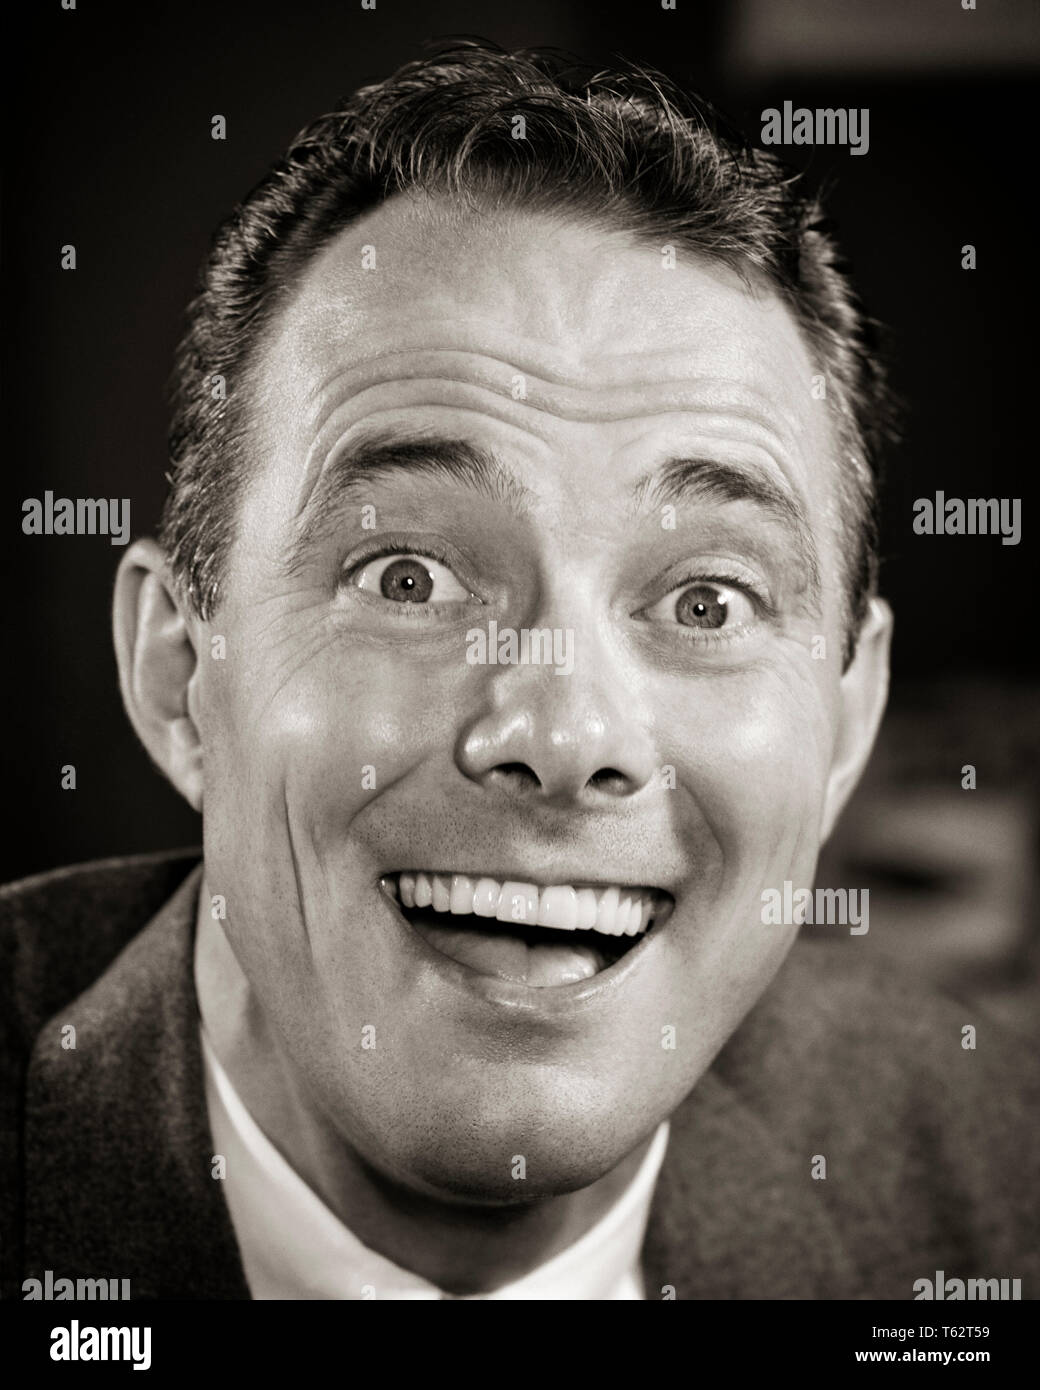 1950s HAPPY LAUGHING MAN FUNNY FACIAL EXPRESSION WITH EYES WIDE OPEN LOOKING AT CAMERA - bx016526 CAM001 HARS MALES CONFIDENCE EXPRESSIONS AMAZED B&W WIDE EYE CONTACT SUCCESS TEMPTATION WONDER AWE DREAMS HAPPINESS HEAD AND SHOULDERS CHEERFUL DISCOVERY VICTORY EXCITEMENT CAM001 PRIDE SMILES AWED CLOSE-UP EXTREME JOYFUL LAUGHTER WIDE-EYED CONFIDENT EAGER EMOTION EMOTIONAL EMOTIONS MID-ADULT MID-ADULT MAN WOW BLACK AND WHITE CAUCASIAN ETHNICITY OLD FASHIONED Stock Photo